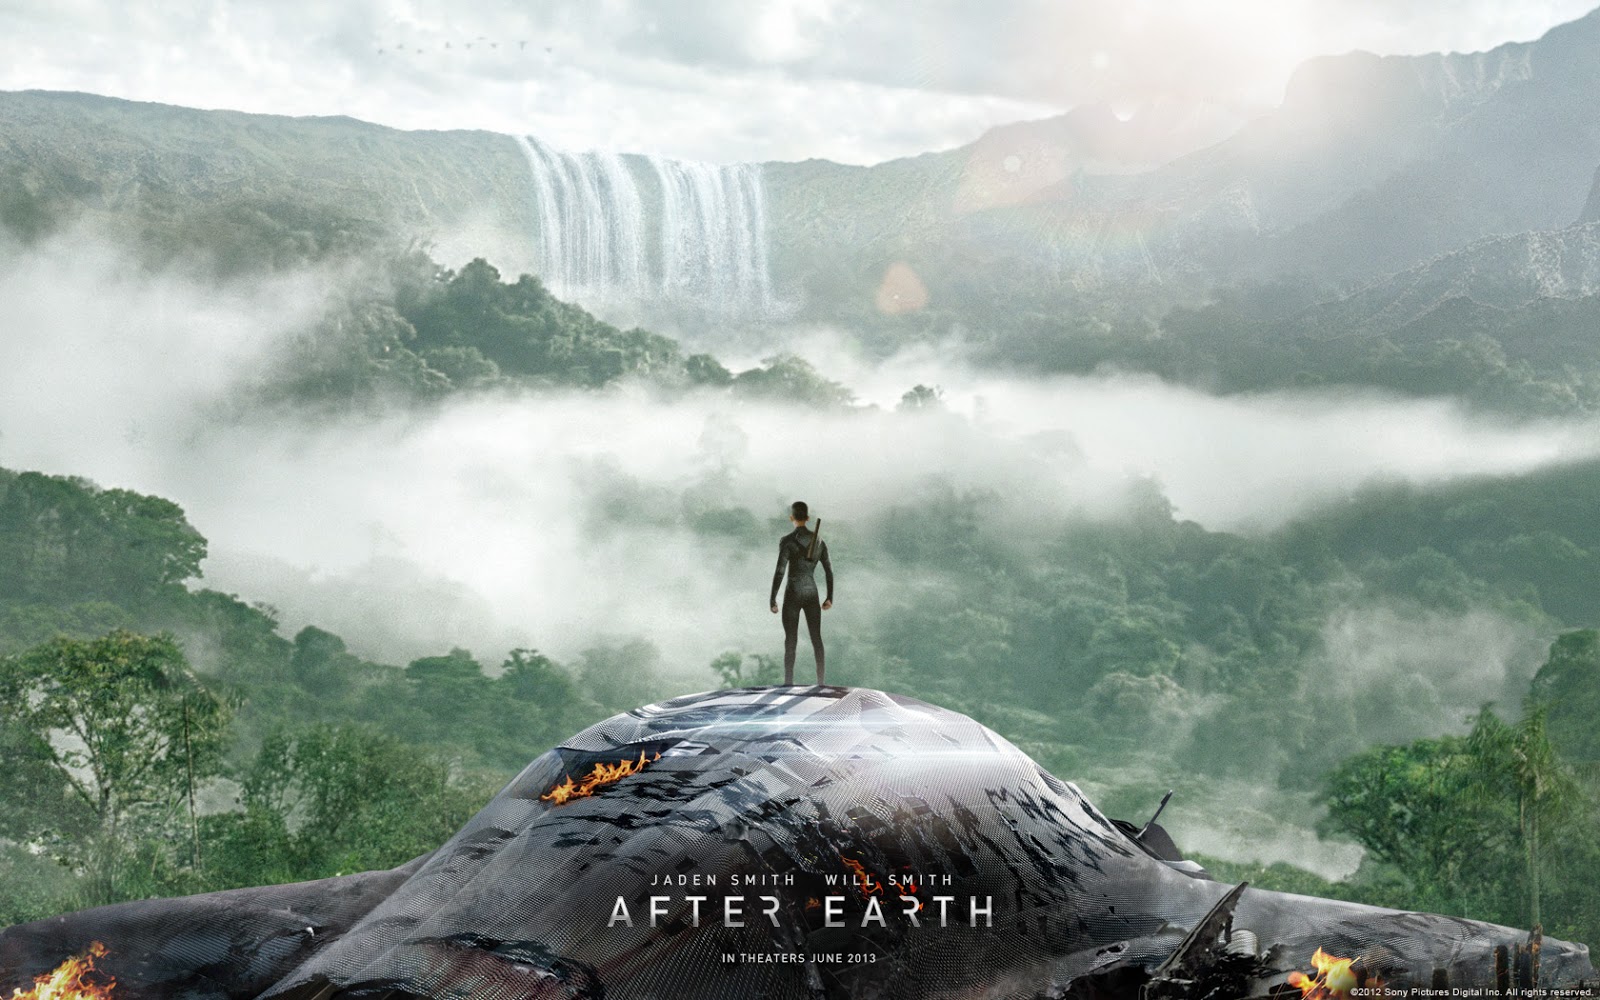 after earth 123movies for free